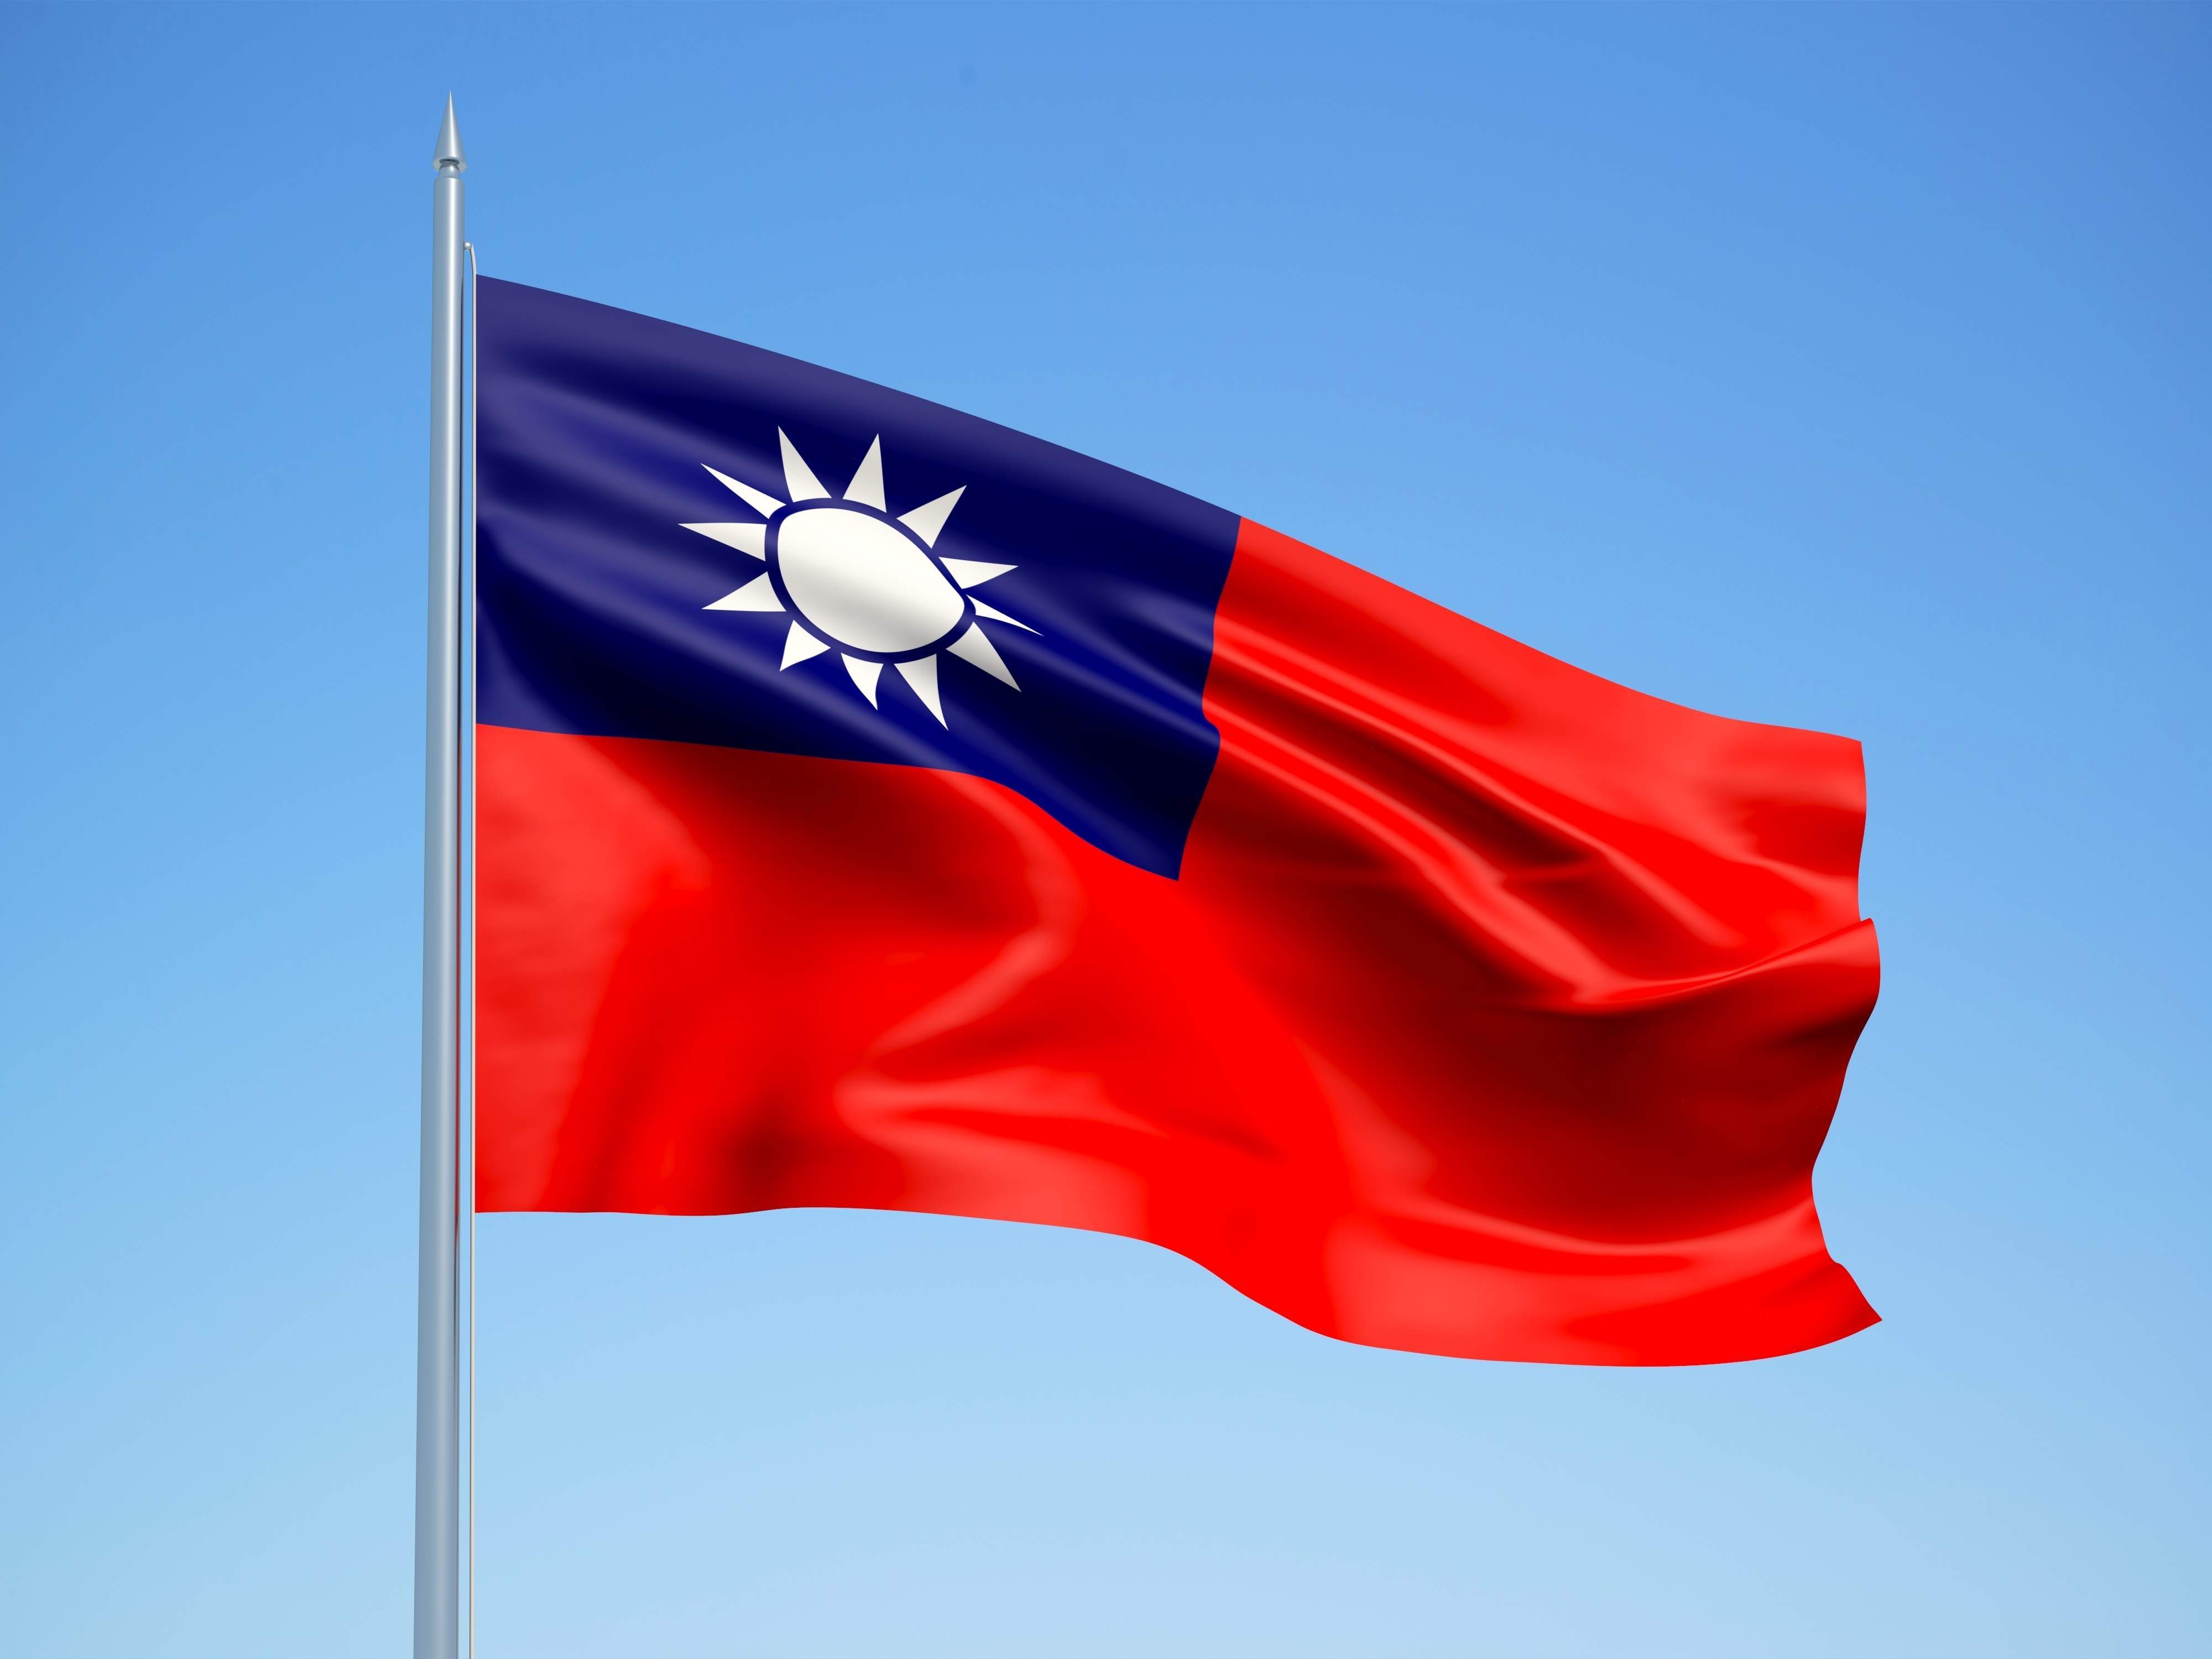 Focus on Taiwan: offshore wind energy’s new frontier